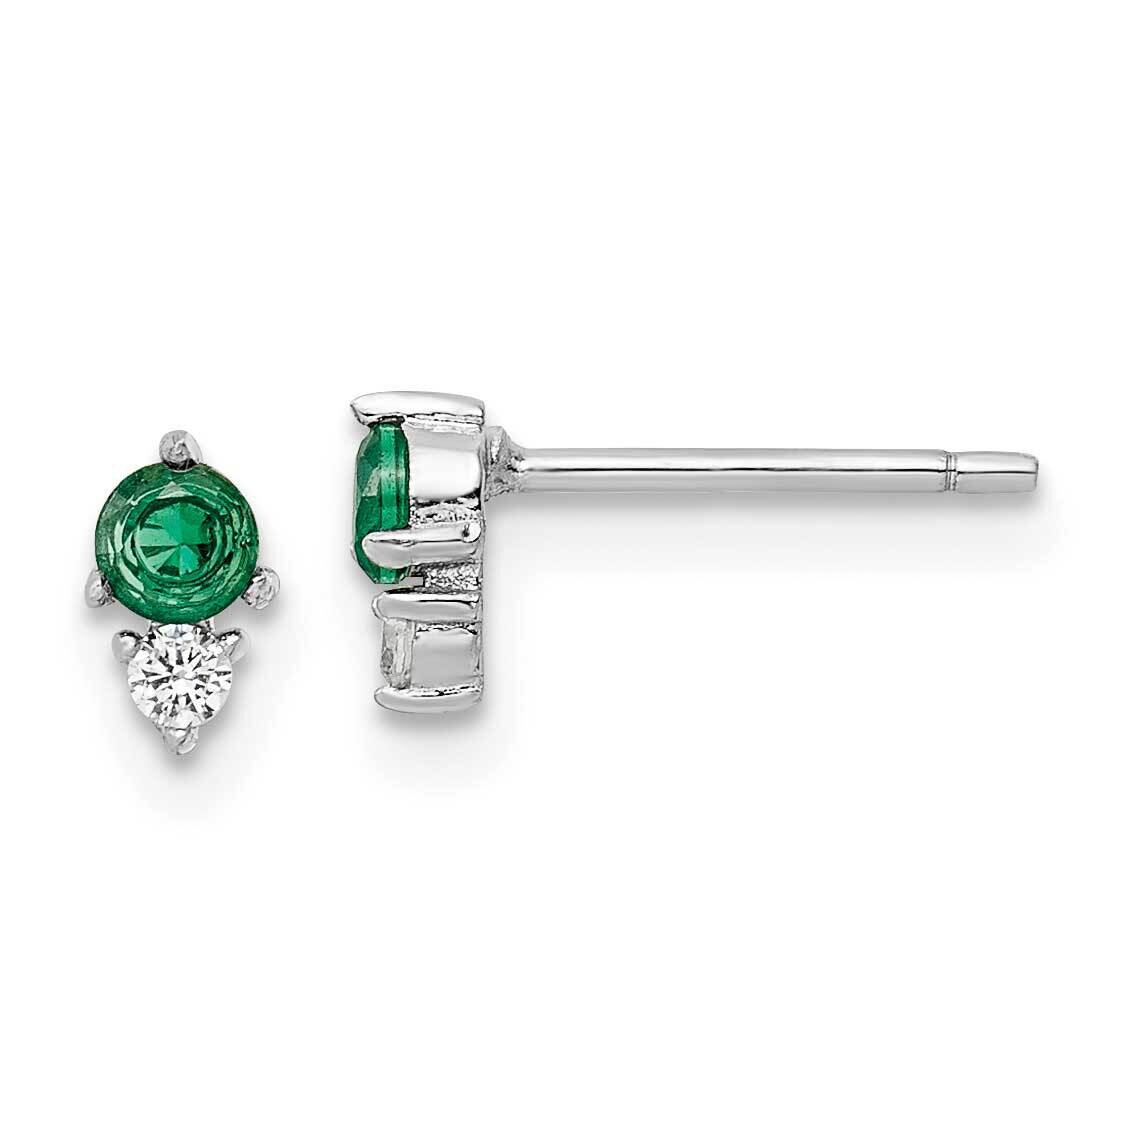 Green & White CZ Diamond Post Earrings Sterling Silver Rhodium-Plated Polished QE16155